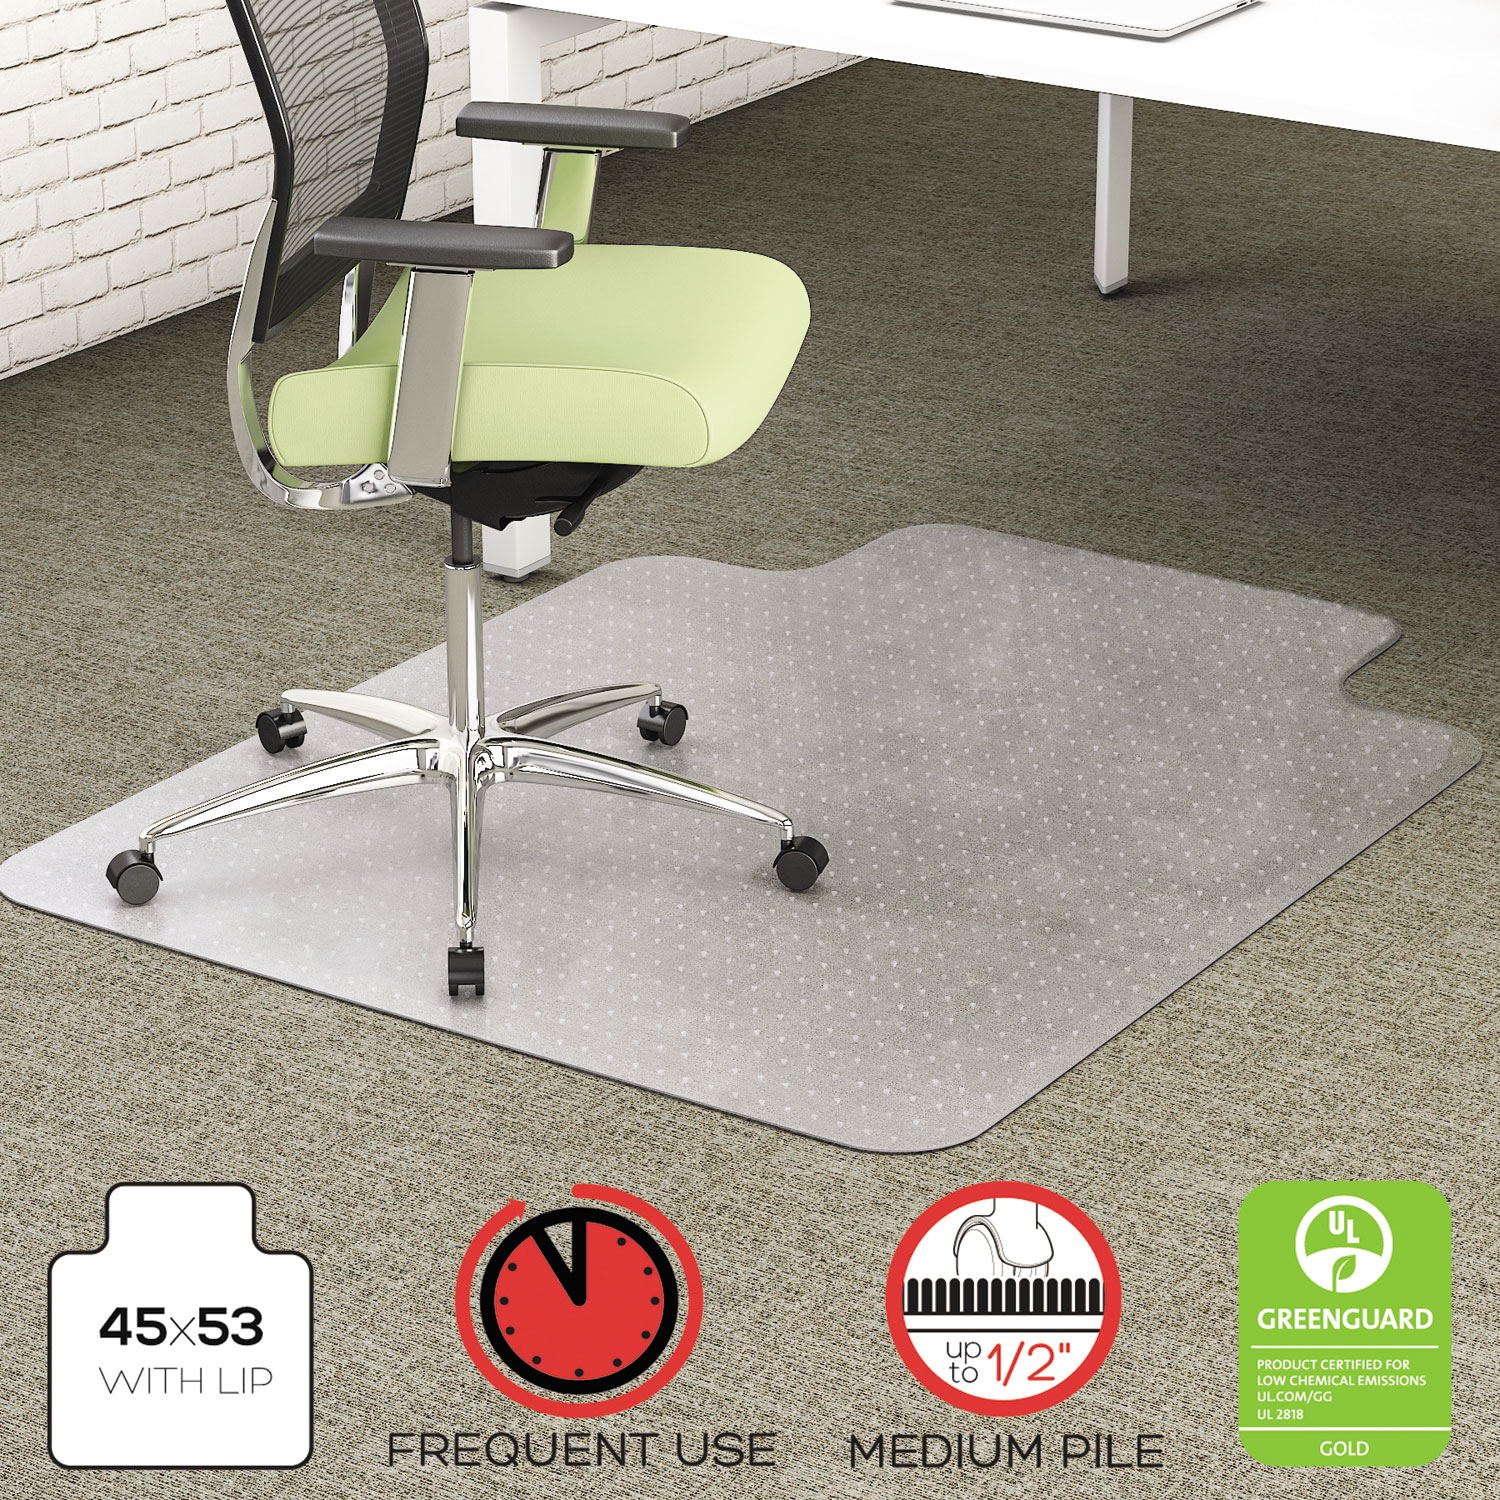  deflecto CM1K232PET EnvironMat Recycled Anytime Use Chair Mat, Med Pile Carpet, 45 x 53 with Lip, Clear (DEFCM1K232PET) 